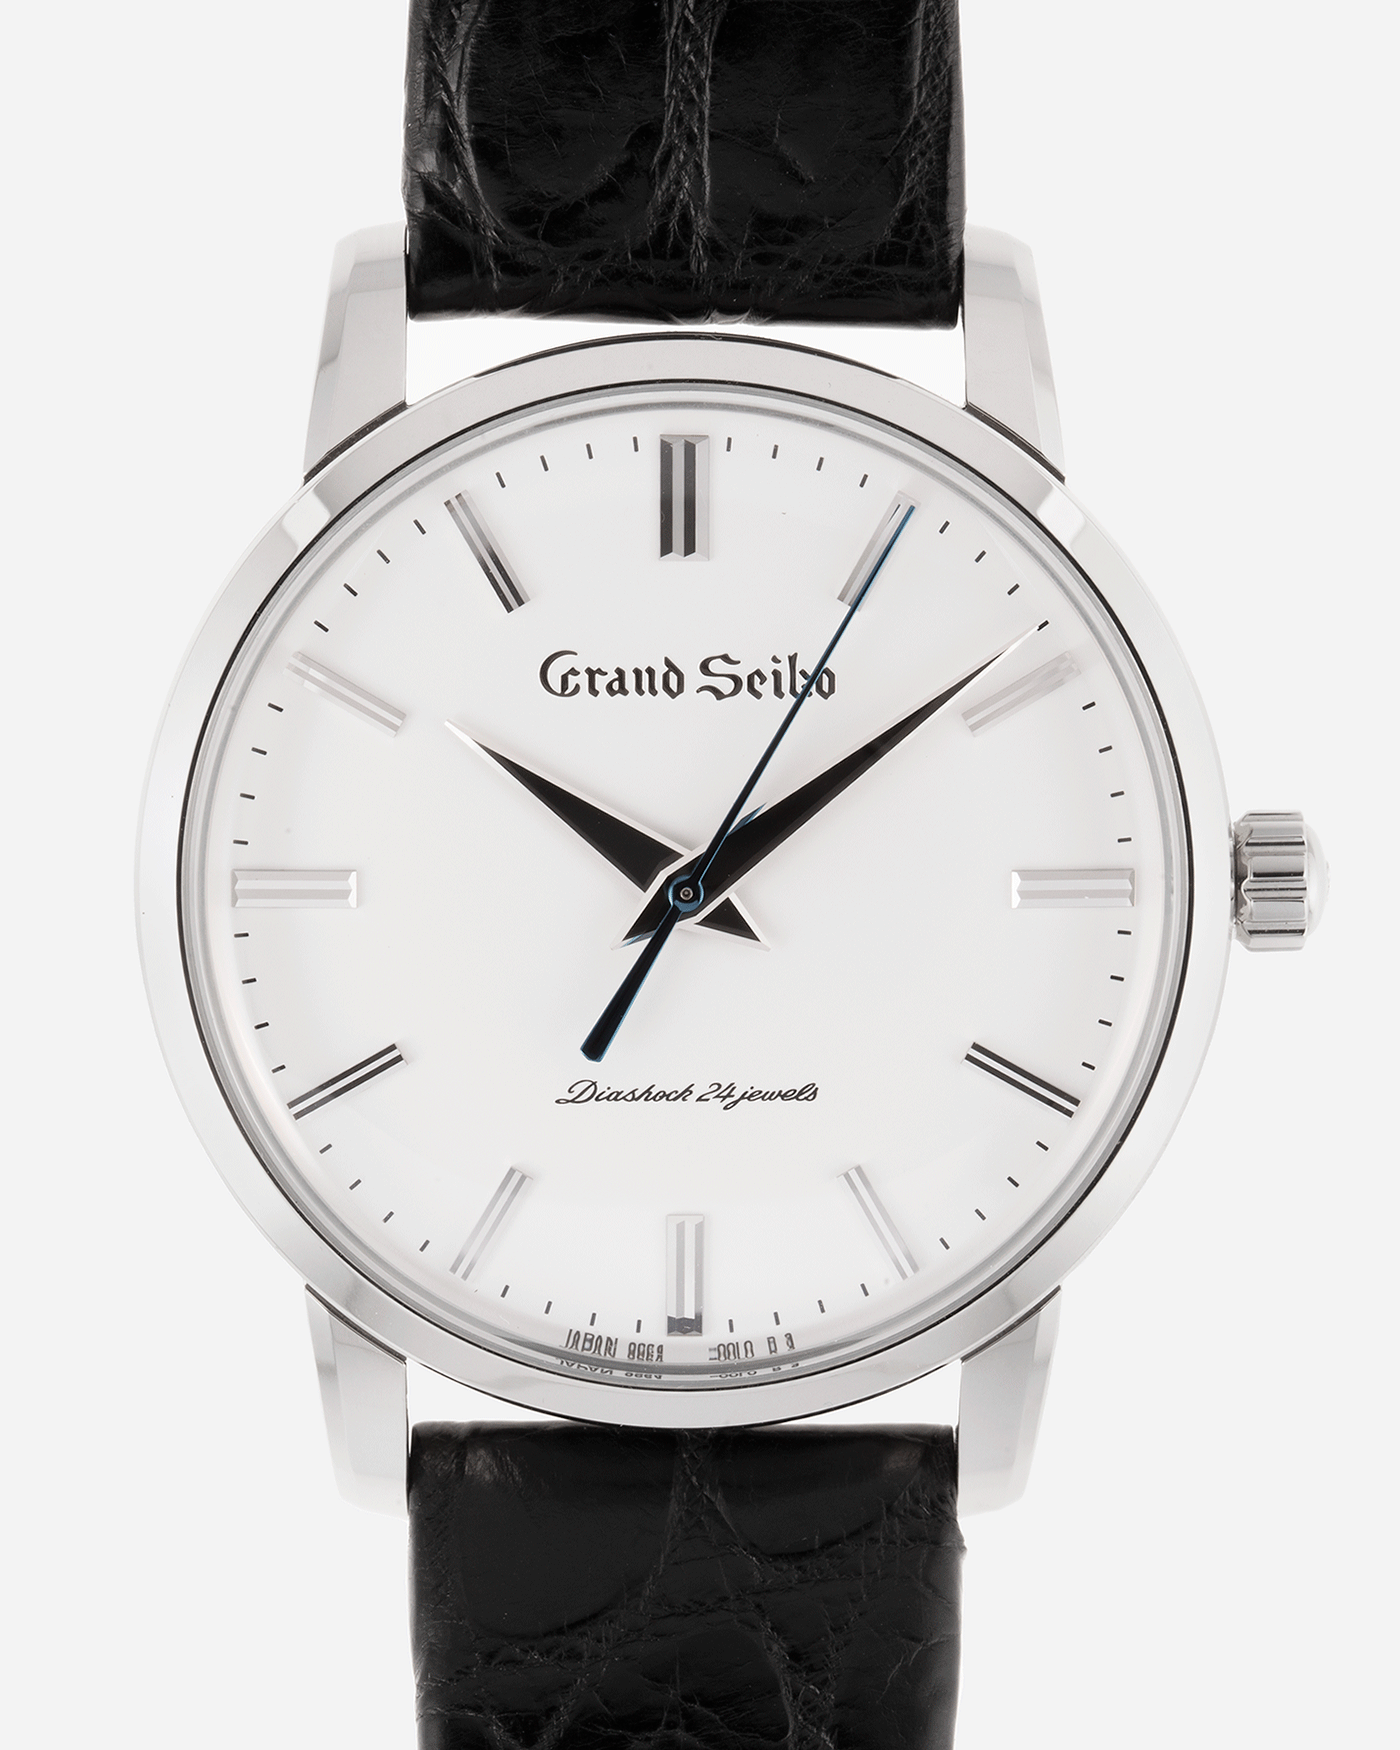 Brand: Grand Seiko Year: 2017 Model: SBGW253 Material: Stainless Steel Movement: Manually wound Grand Seiko caliber 9S64 Case Diameter: 38mm Bracelet: Grand Seiko Black Alligator Strap with stainless steel buckle